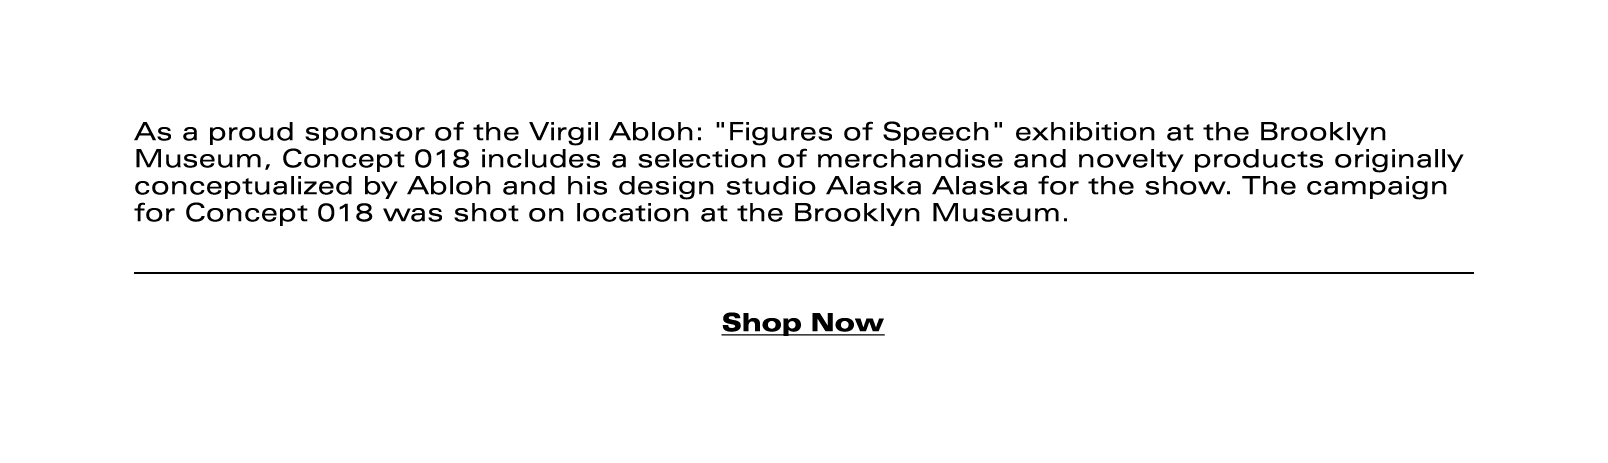 As a proud sponsor of the Virgil Abloh: "Figures of Speech" exhibition at the Brooklyn Museum, Concept 018 includes a selection of merchandise and novelty products originally conceptualized by Abloh and his design studio Alaska Alaska for the show. The campaign for Concept 018 was shot on location at the Brooklyn Museum.